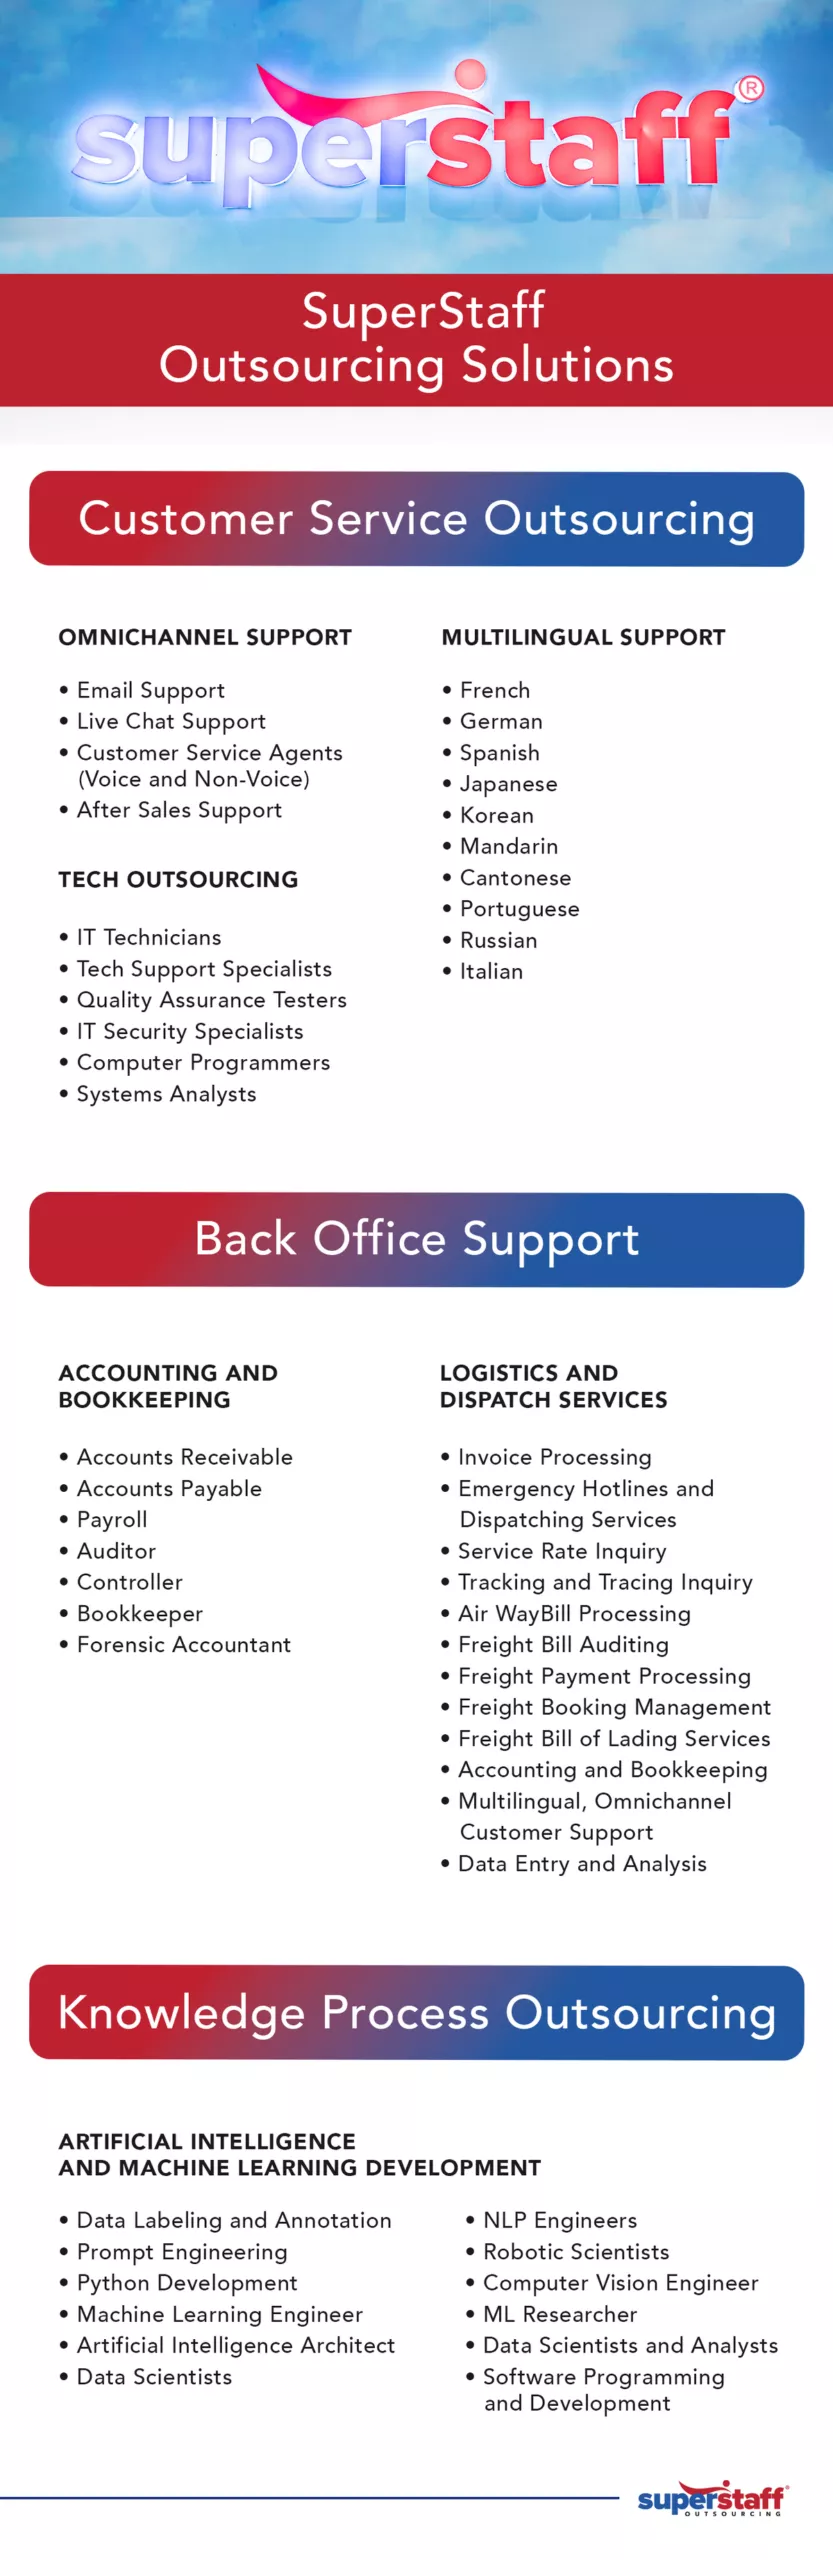 An infographic shows a list of SuperStaff outsourcing solutions that can support logistics companies.